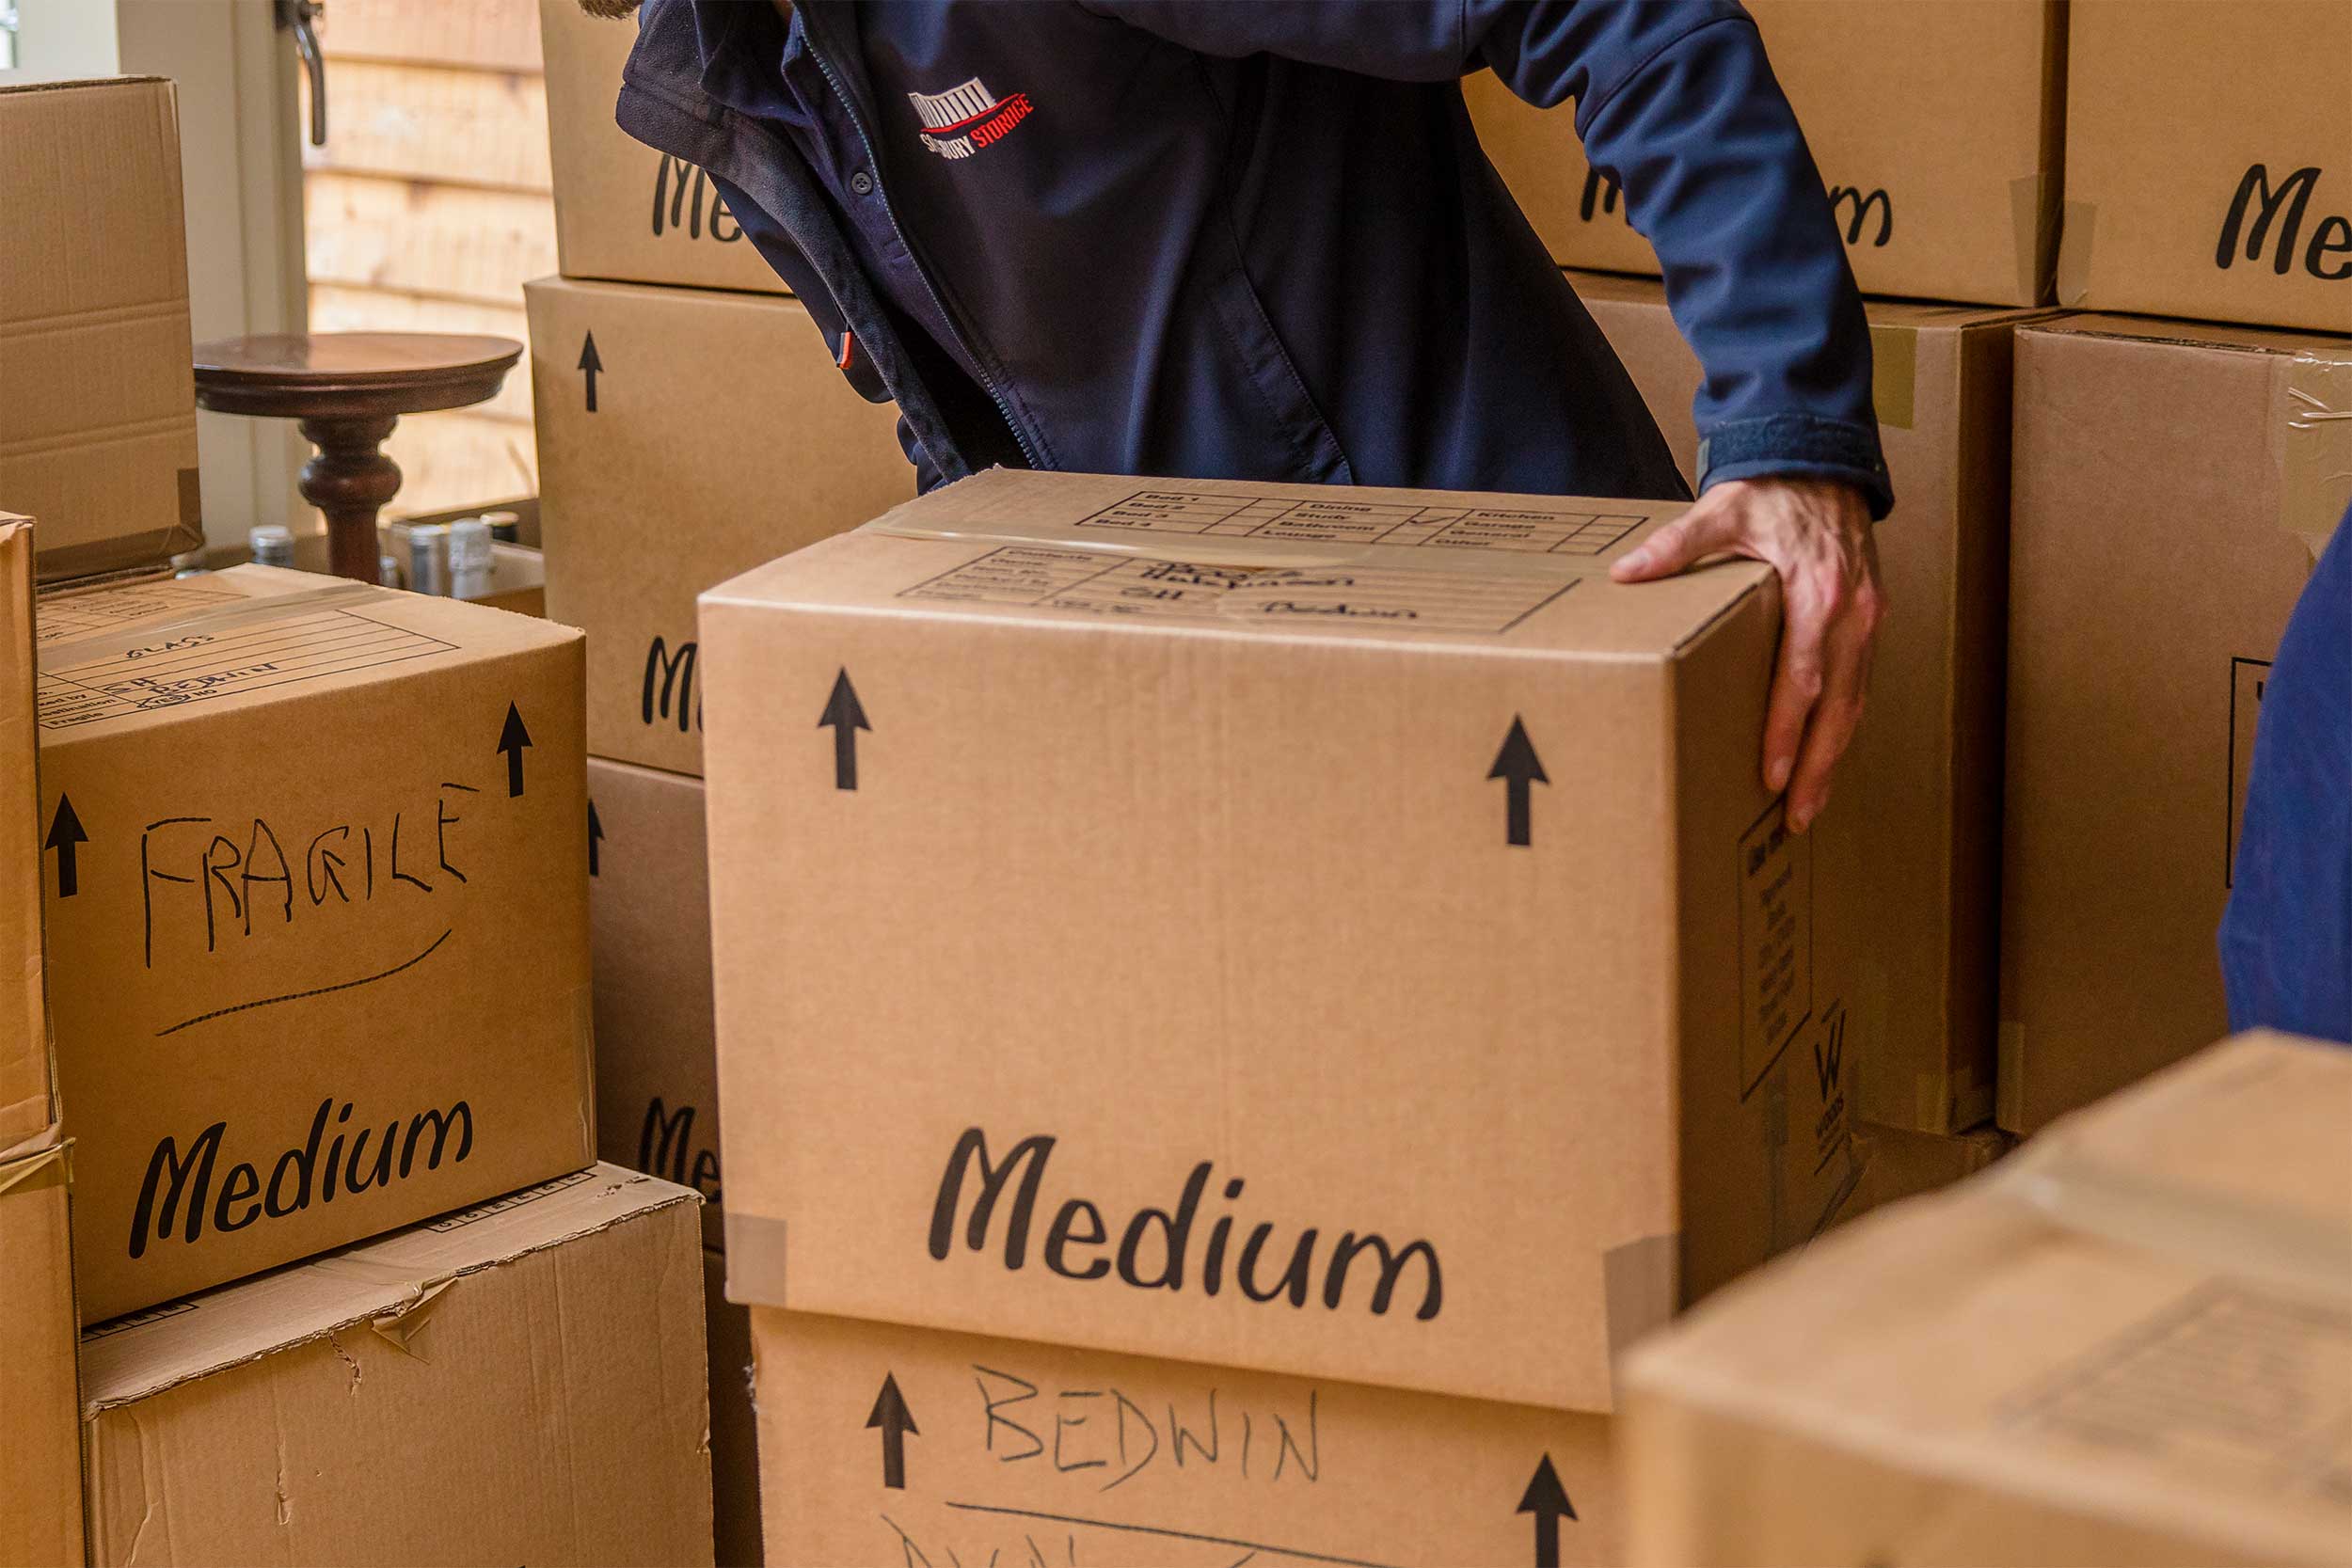 A removals man diligently relocates boxes within a room, displaying efficiency and organisation in his task.